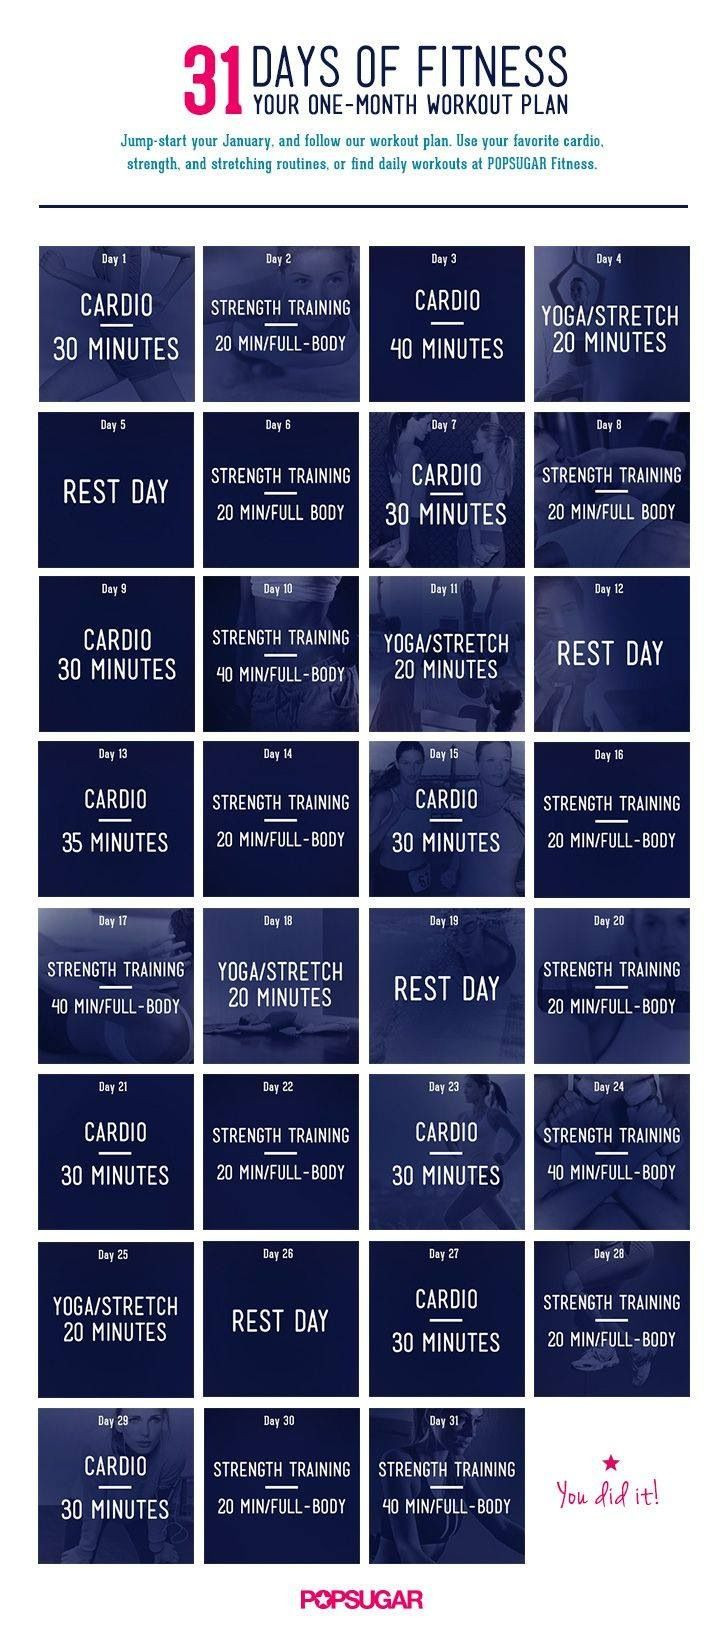 31 Days of Fitness: Get Fit 2014